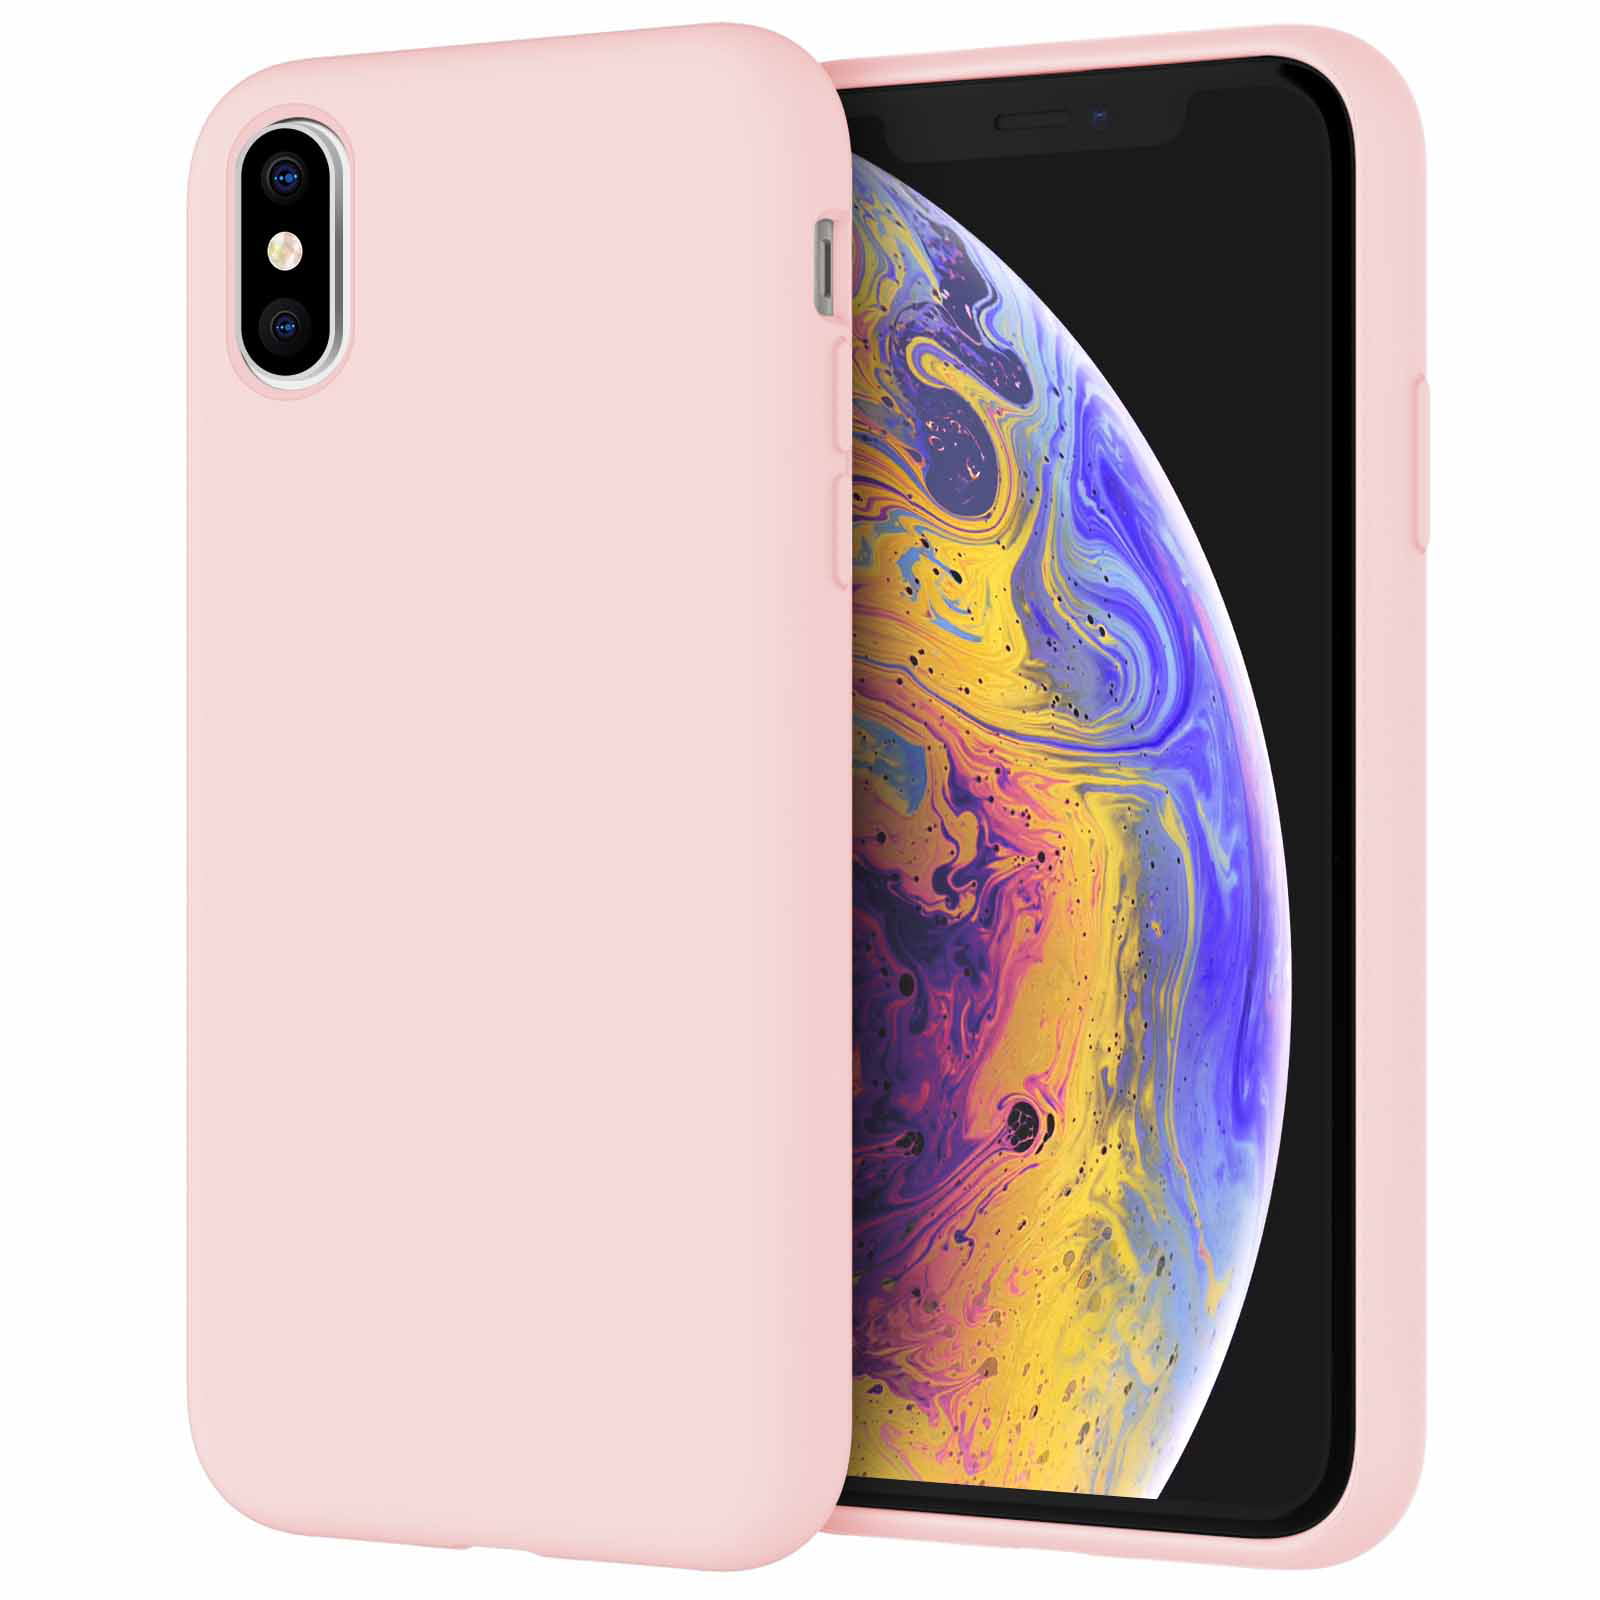 JETech Case for iPhone Xs and iPhone X 5.8-Inch, Non-Yellowing Shockproof  Phone Bumper Cover, Anti-Scratch Clear Back (Clear)